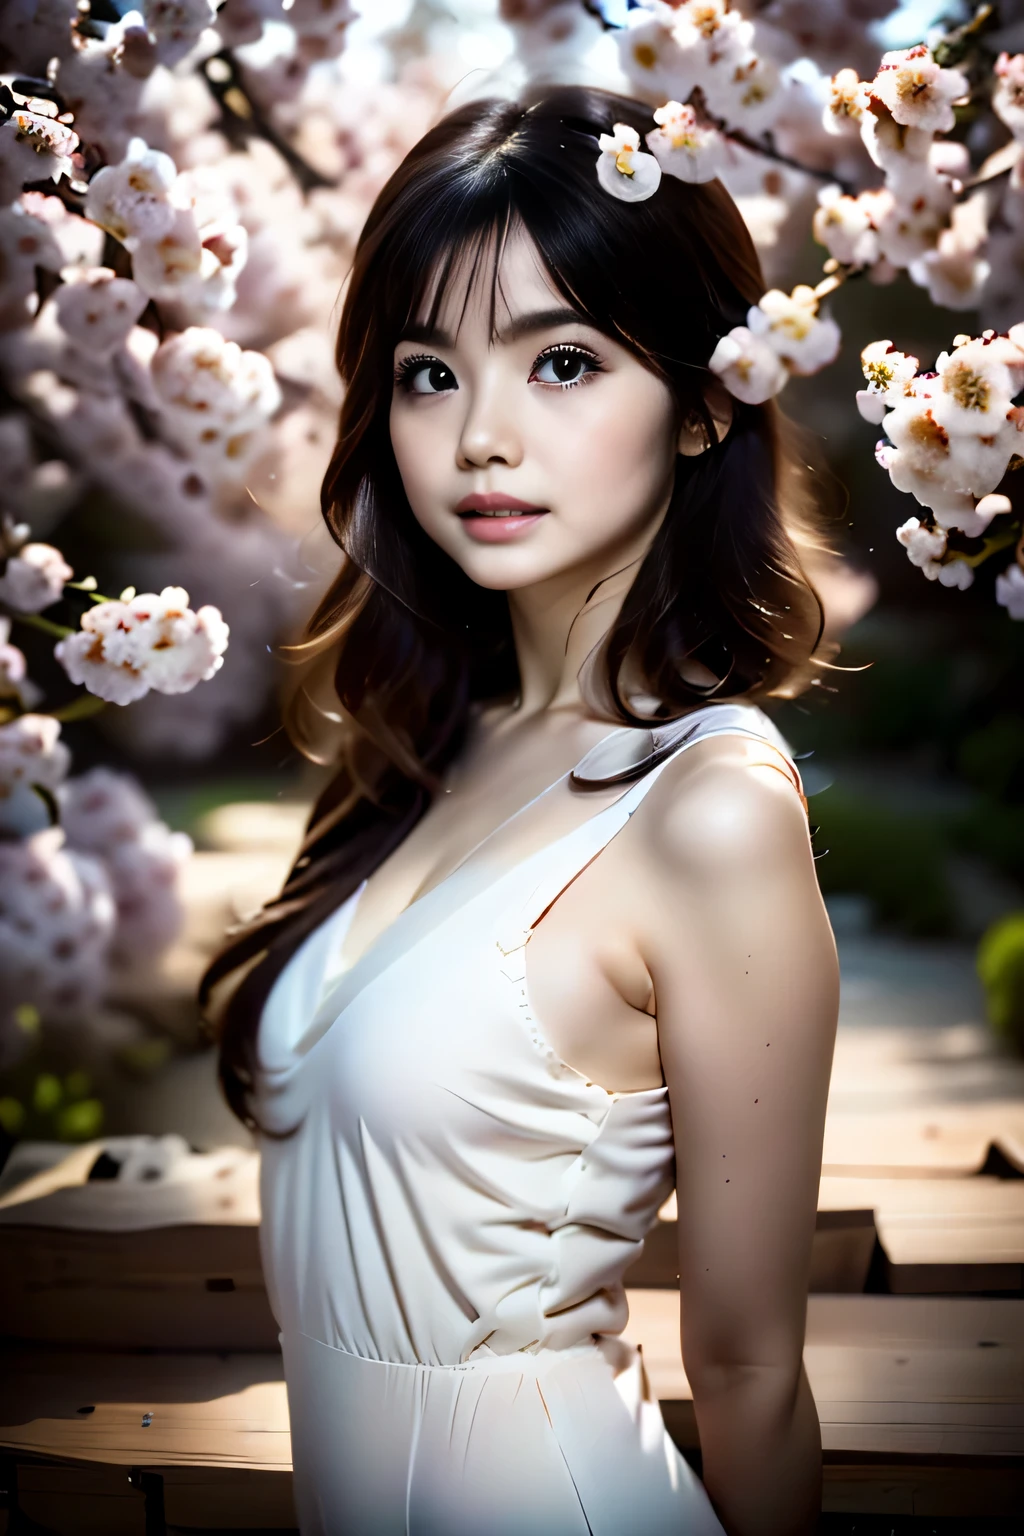 blurred background, cherry blossoms, anatomy, asian, smart woman, small face, beautiful detailed eyes, thick lips, detailed eyes and face, brown eyes, long eyelashes, 1 girl, skin like white porcelain, soft and delicate skin, bangs short, a soft look, long hair, brown hair, careful rendering of hair, elegant posture, natural light, good atmosphere, rosy cheeks, born, top quality, high resolution, masterpiece: 1.3, 8k